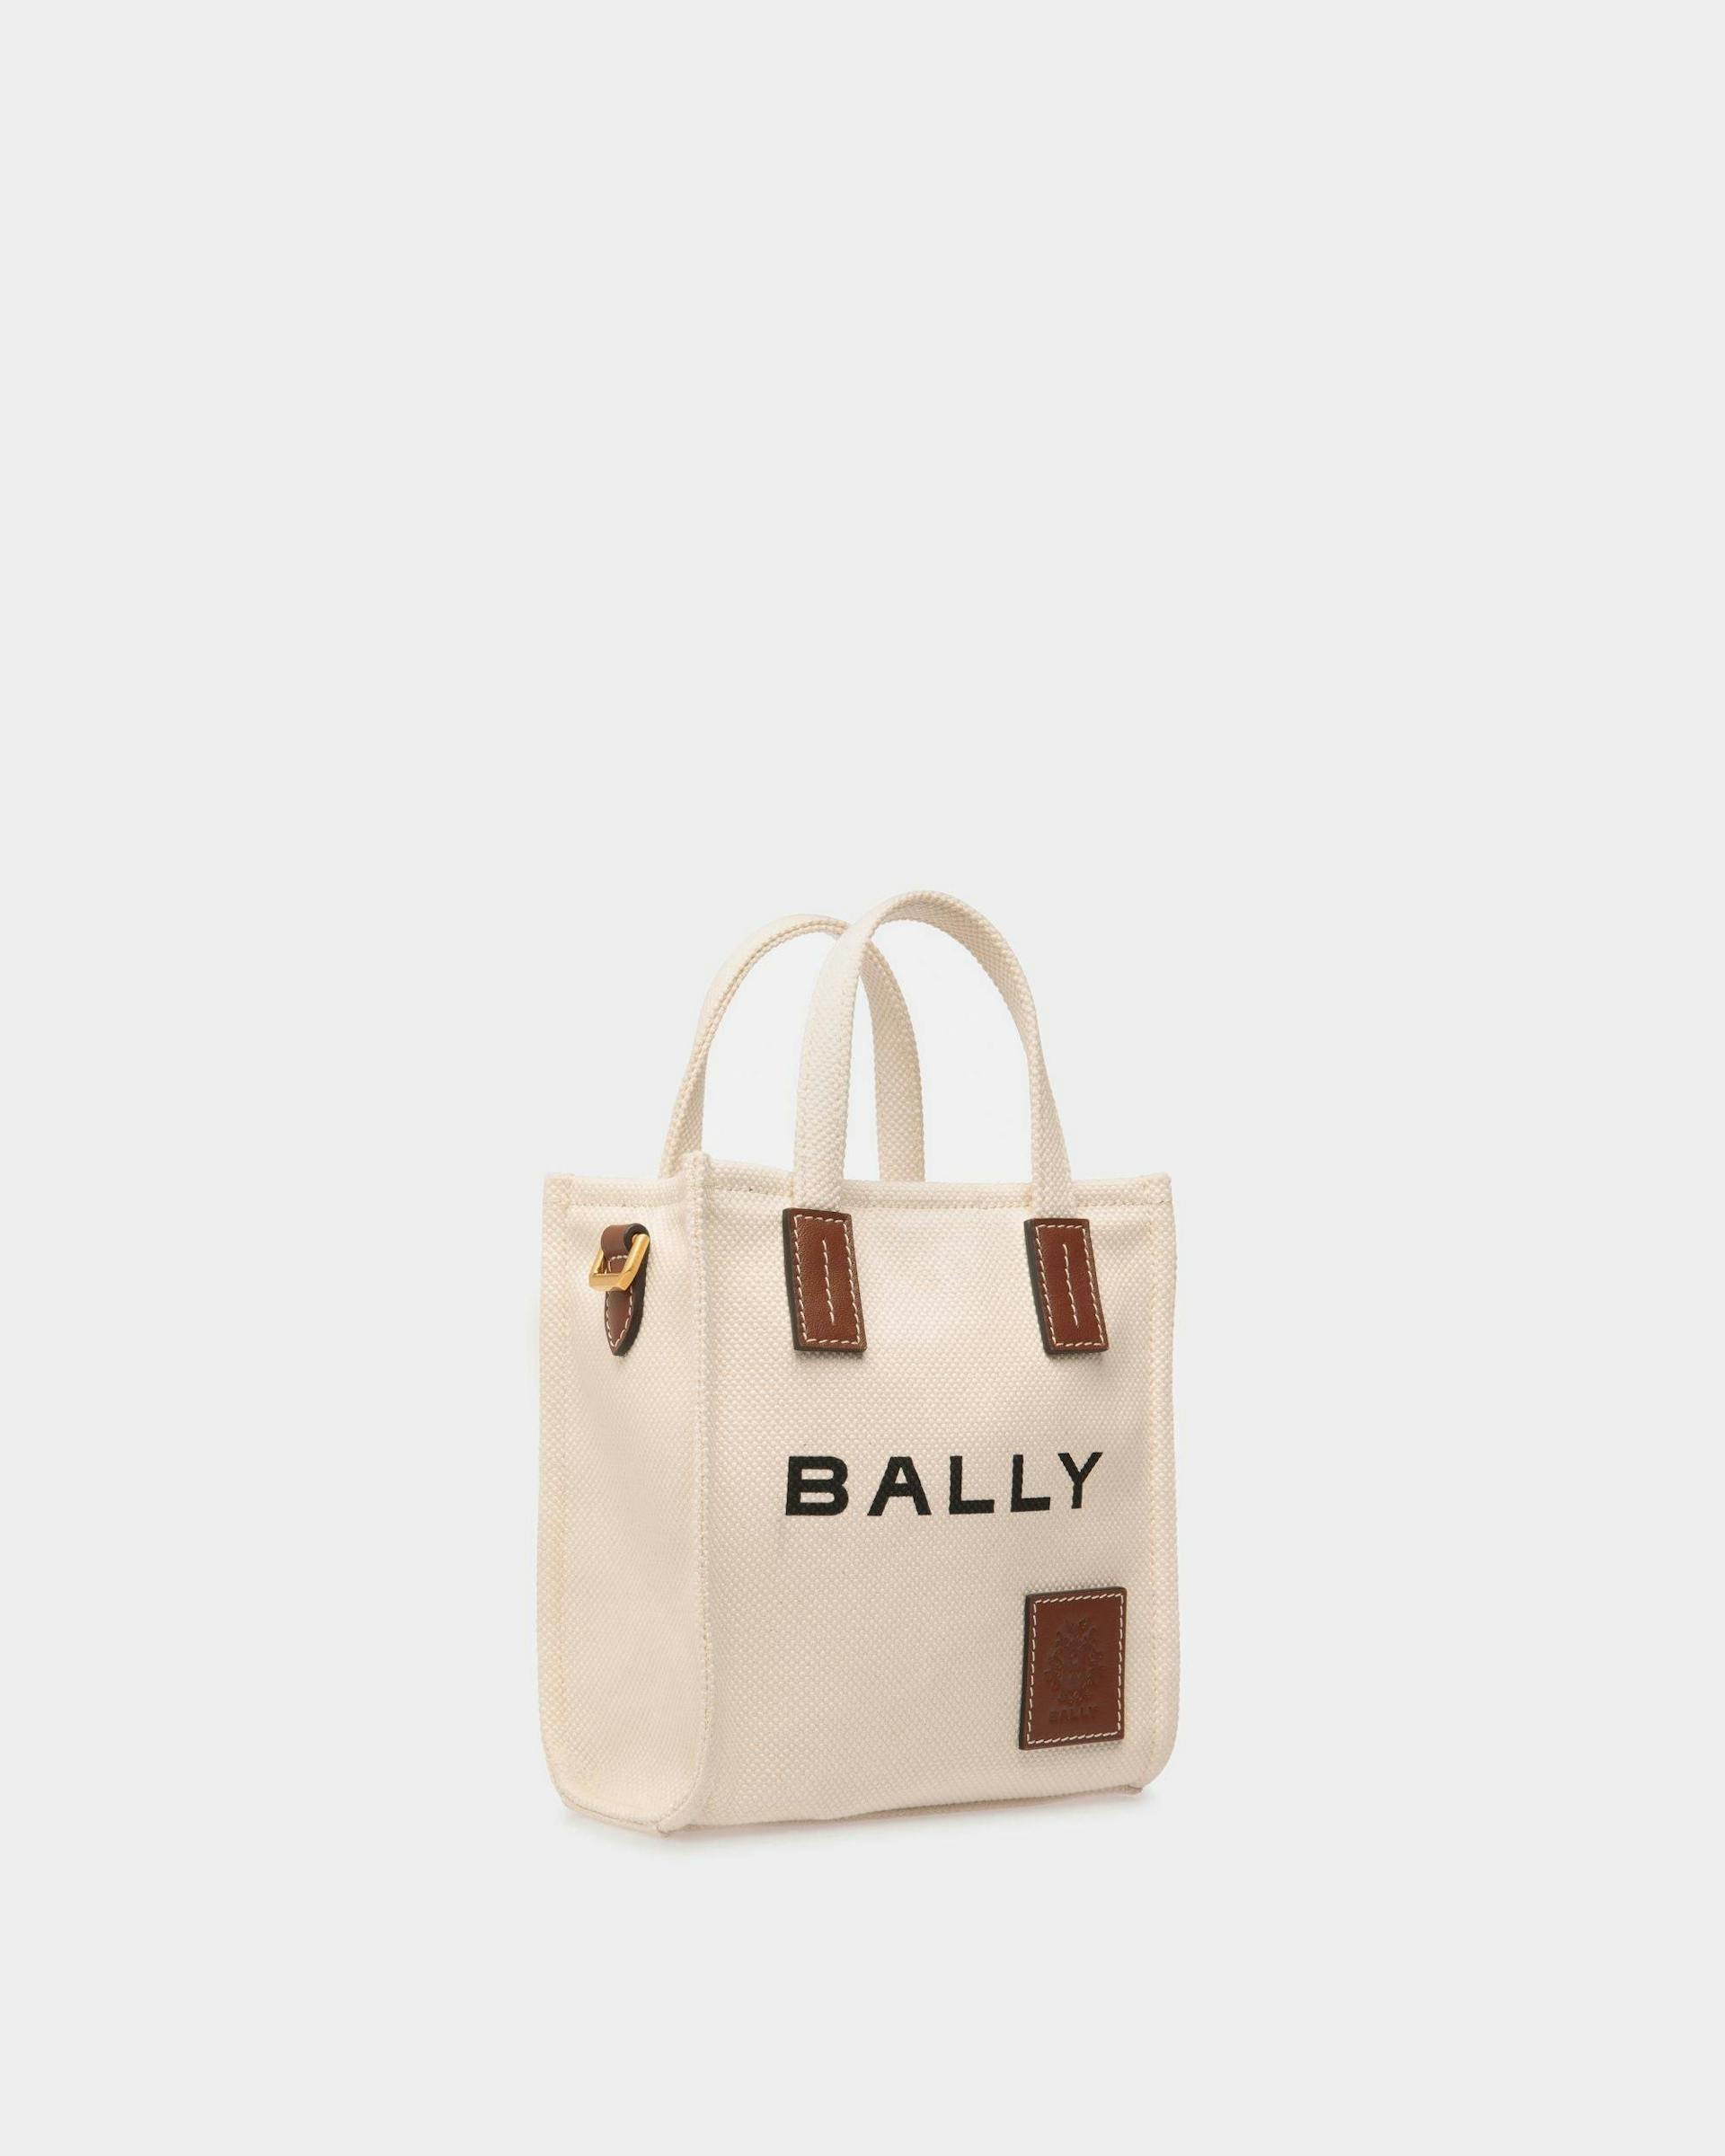 Women's Akelei Mini Tote Bag in Canvas | Bally | Still Life 3/4 Front